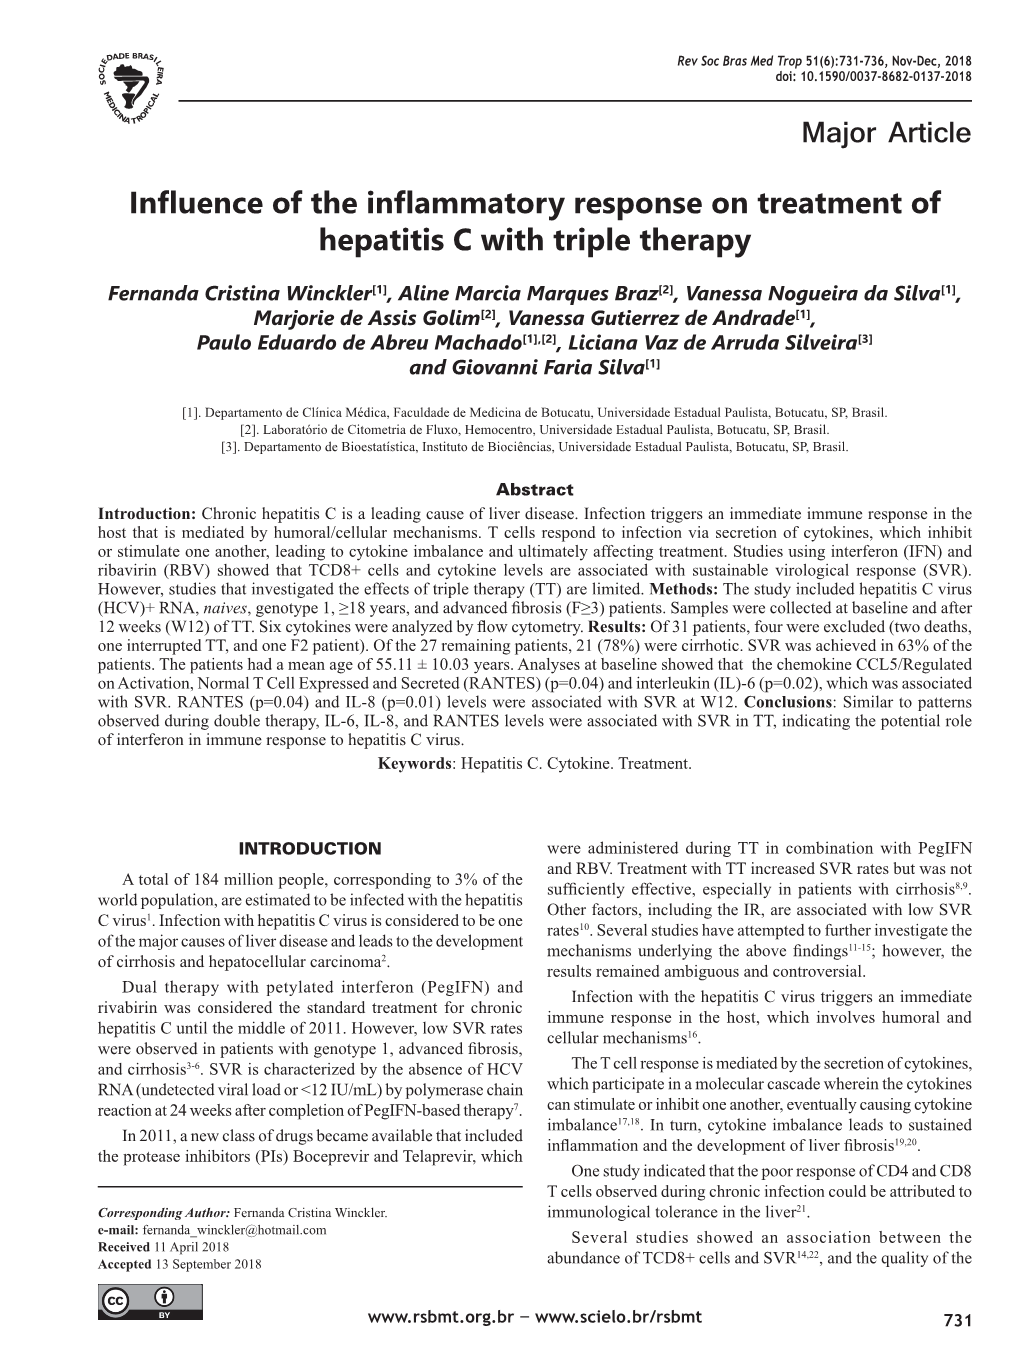 Major Article Influence of the Inflammatory Response on Treatment